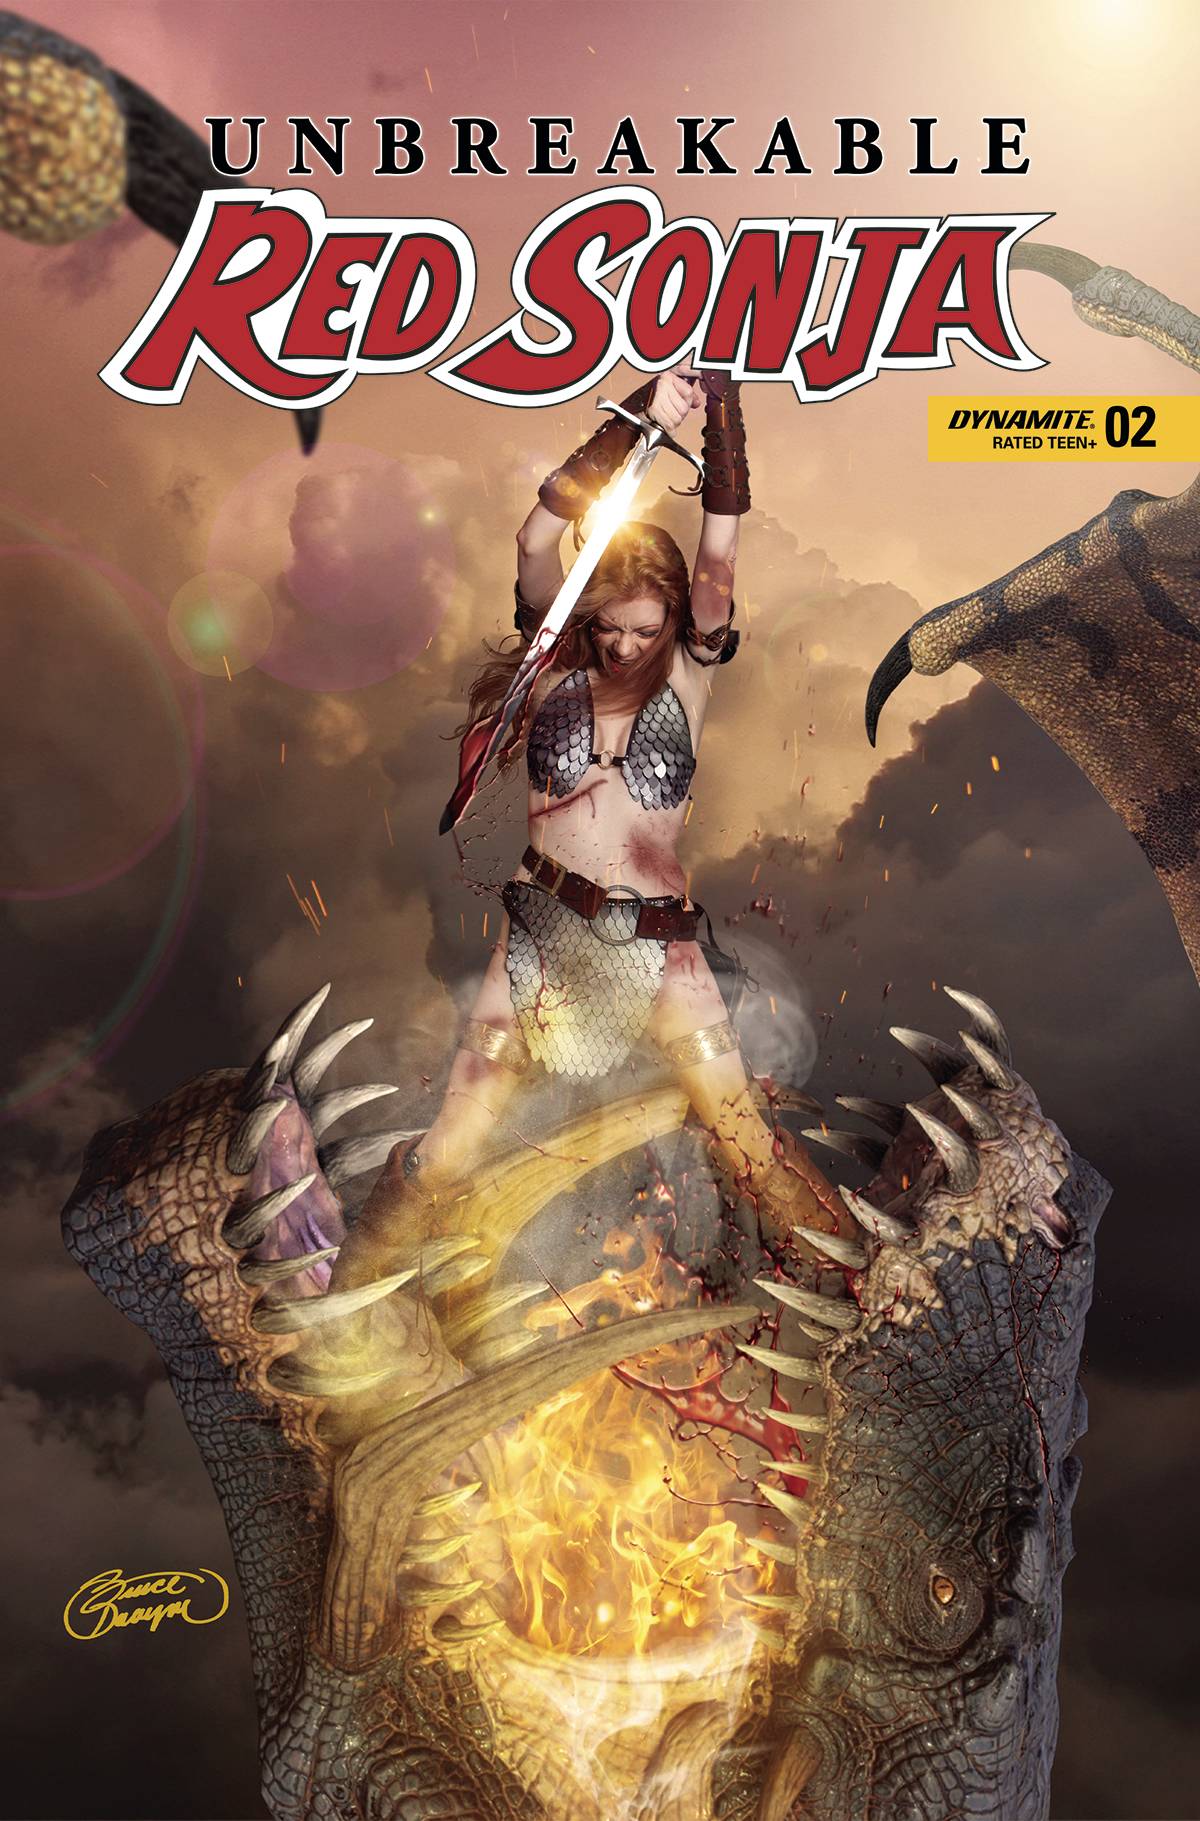 The One Stop Shop Comics & Games Unbreakable Red Sonja #2 Cvr E Cosplay (11/23/2022) DYNAMITE